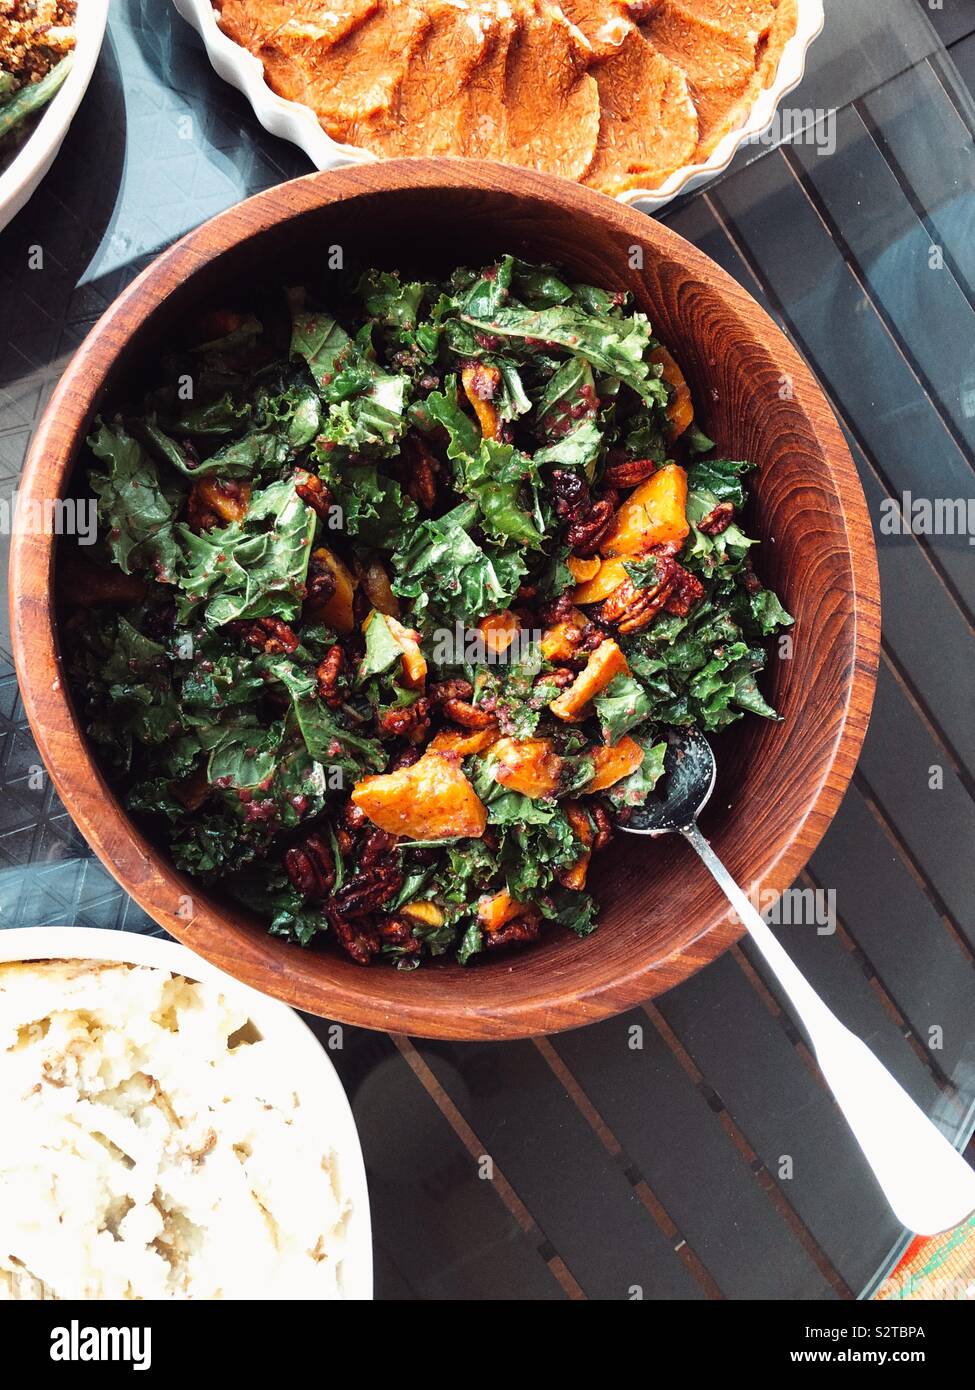 Kale and delicata squash salad for Thanksgiving feast Stock Photo